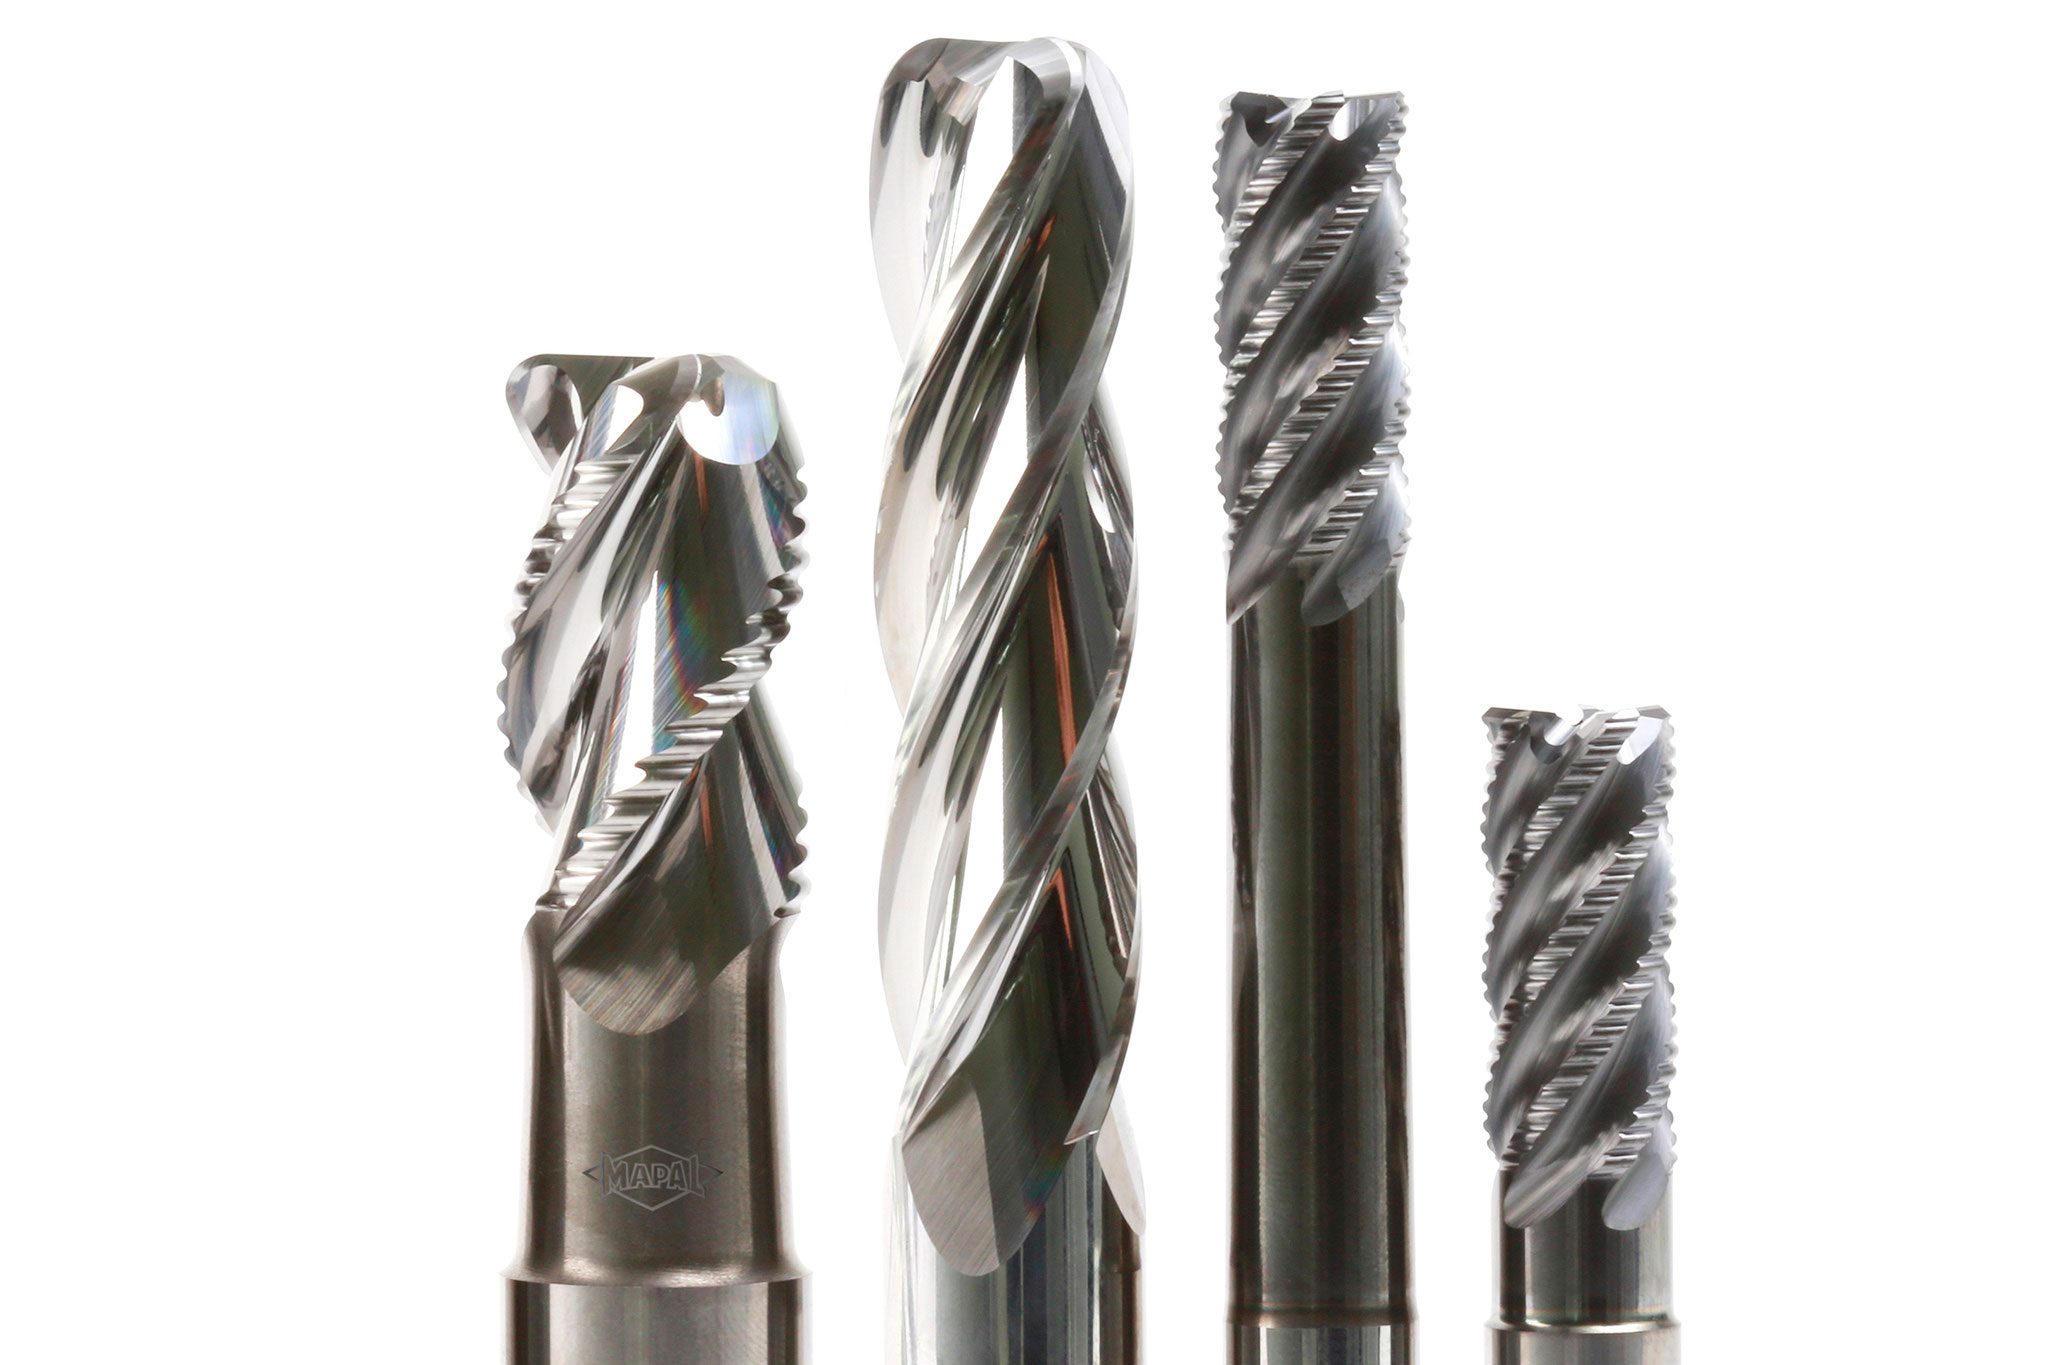 The four new solid carbide milling cutters for high-performance milling of steel and aluminium stand side by side.